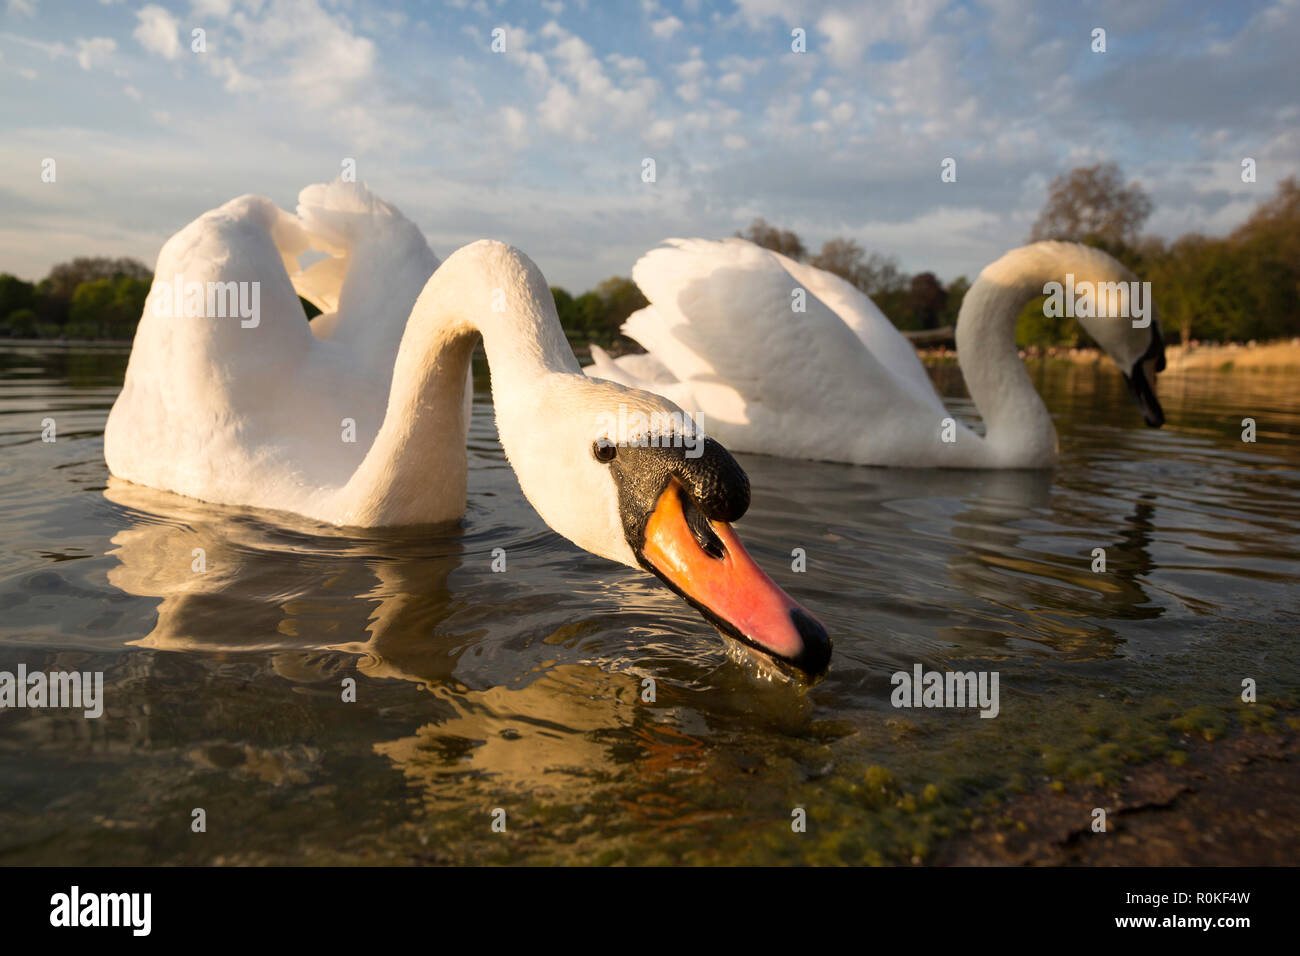 A pair of swans at lake edge in Hyde Park, London, England Stock Photo